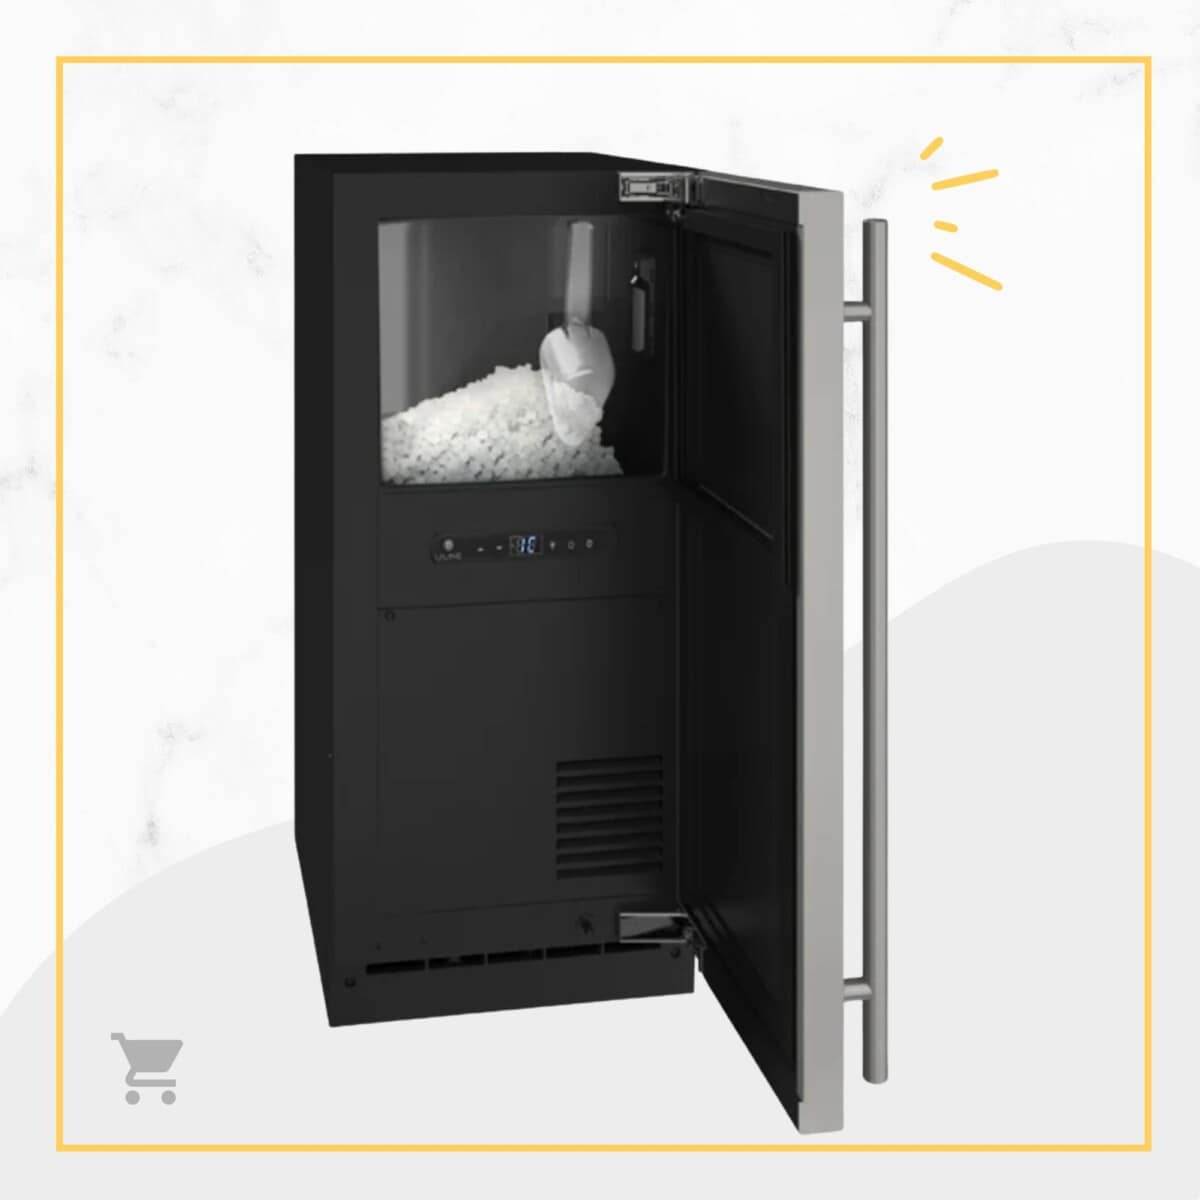 A black ice maker with a door open.